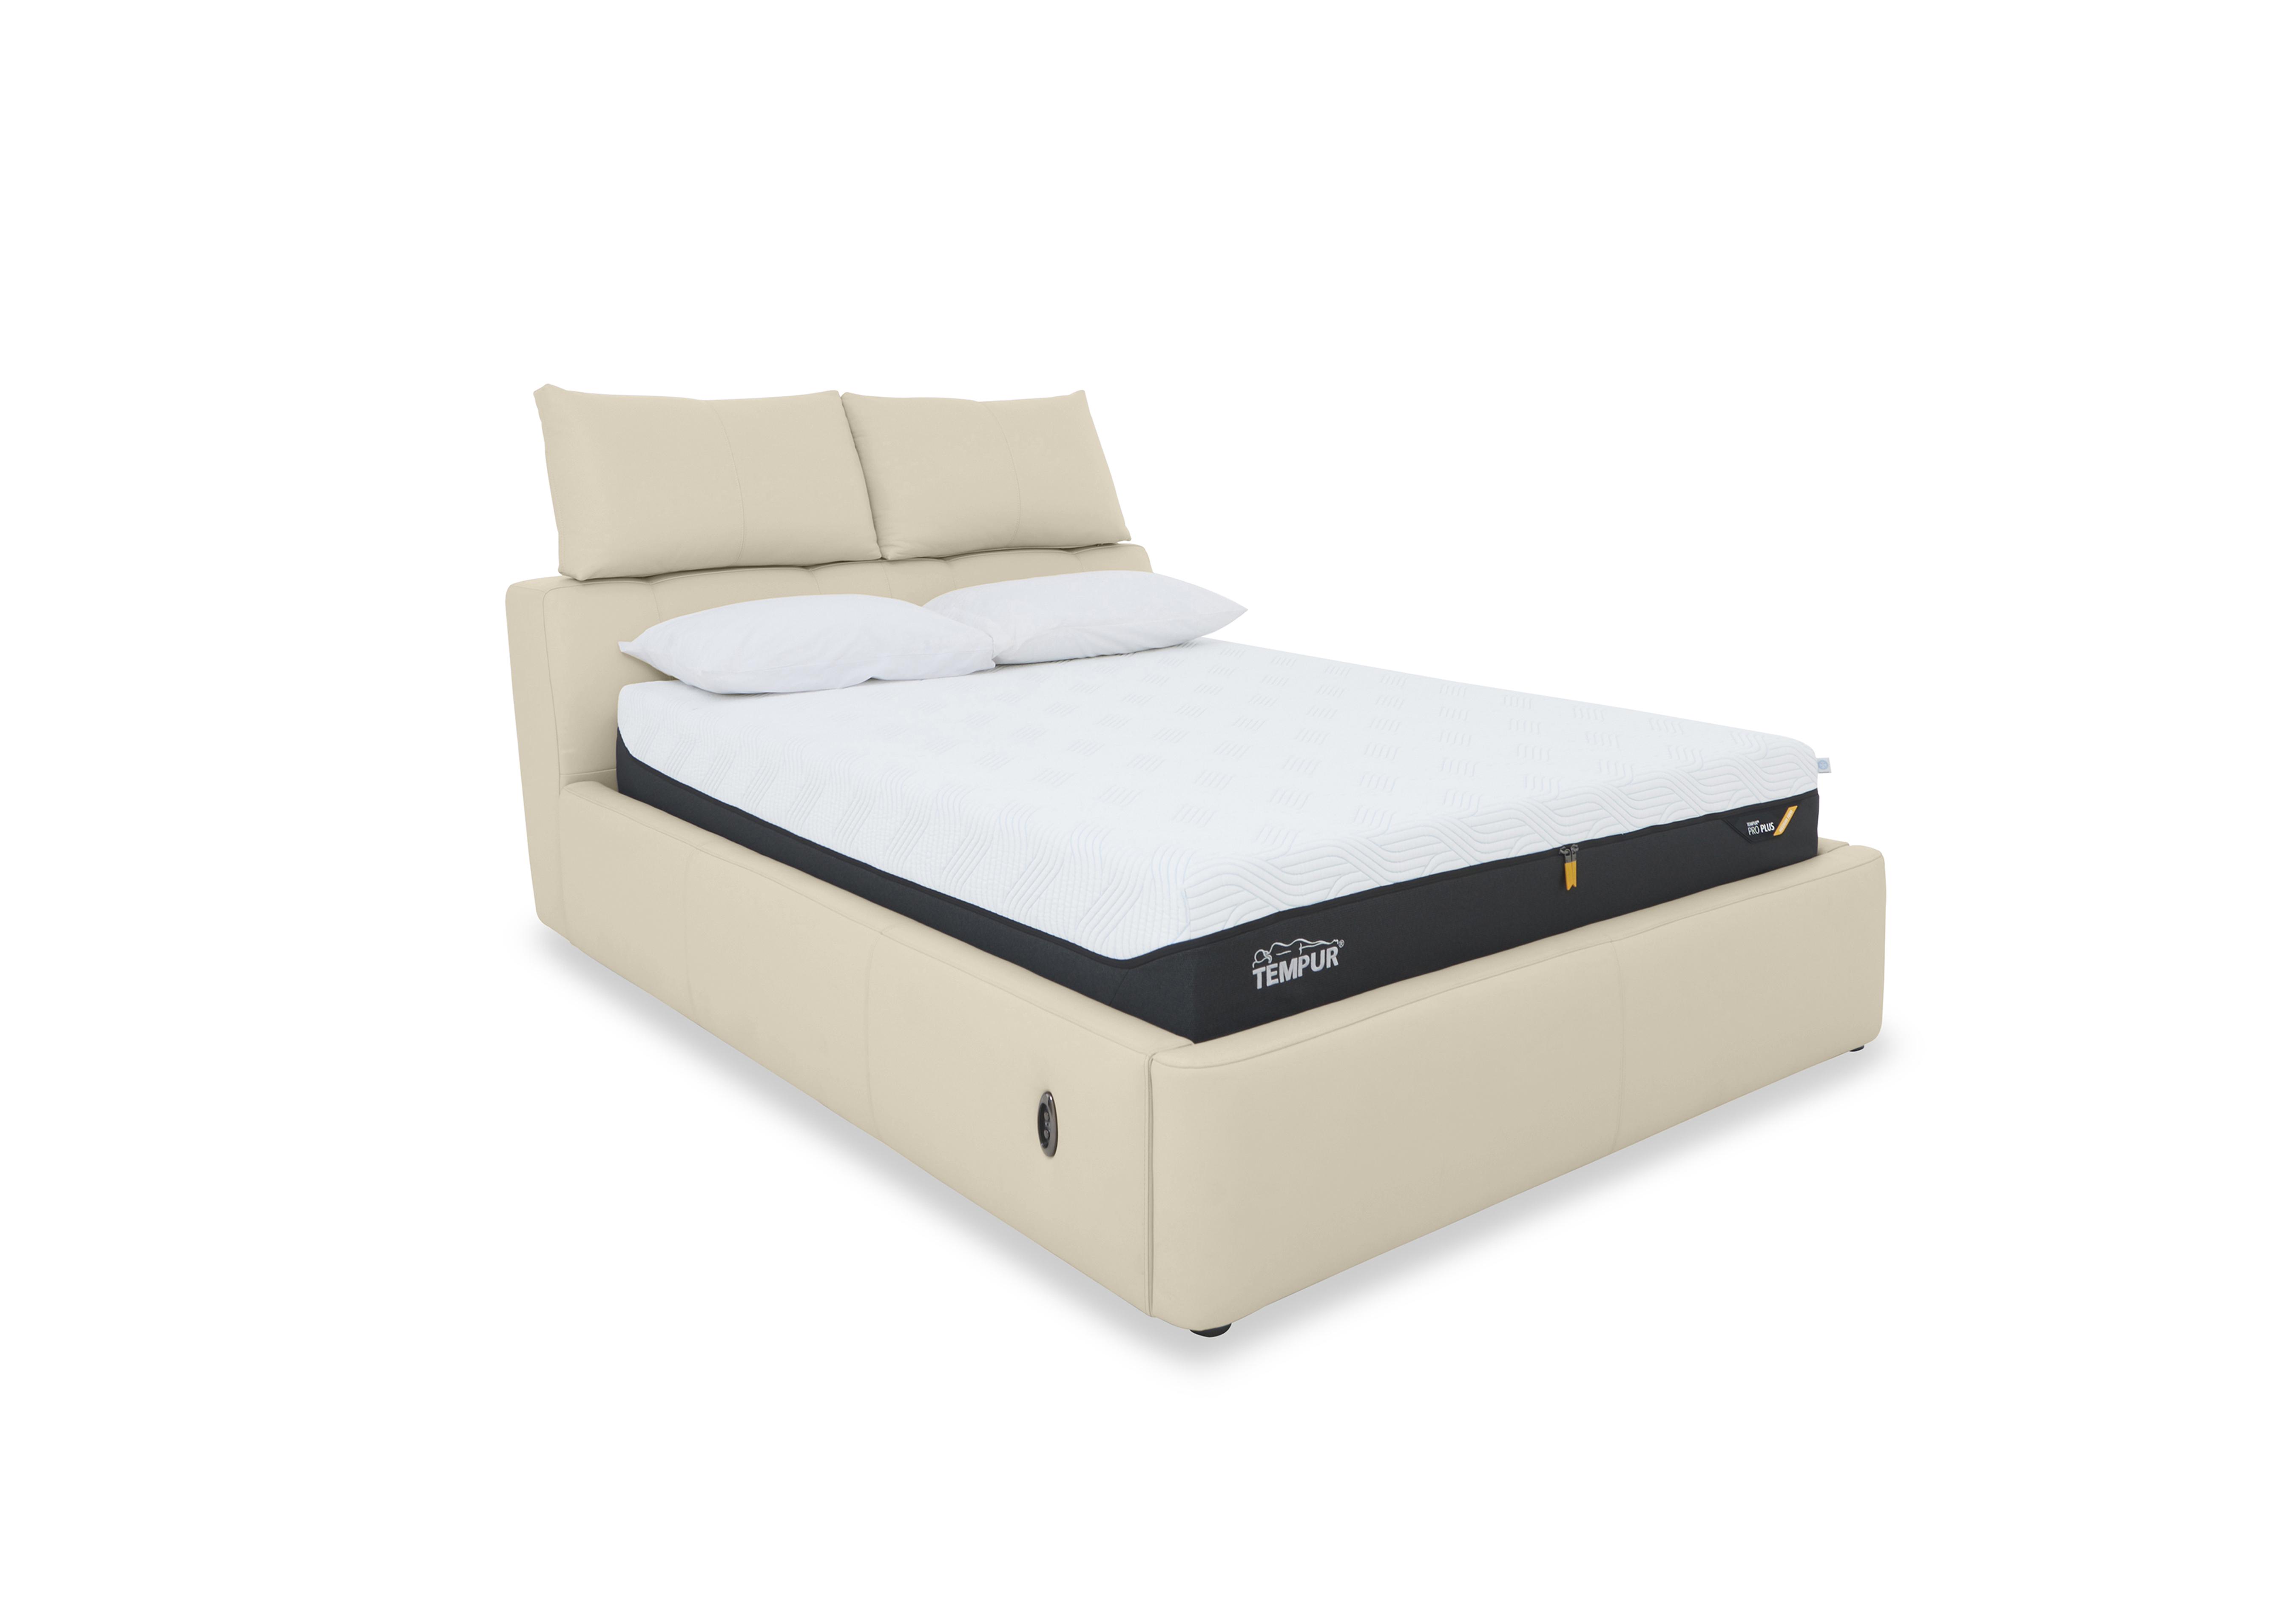 Tyrell Leather Electric Ottoman Bed Frame in Bv-862c Bisque on Furniture Village